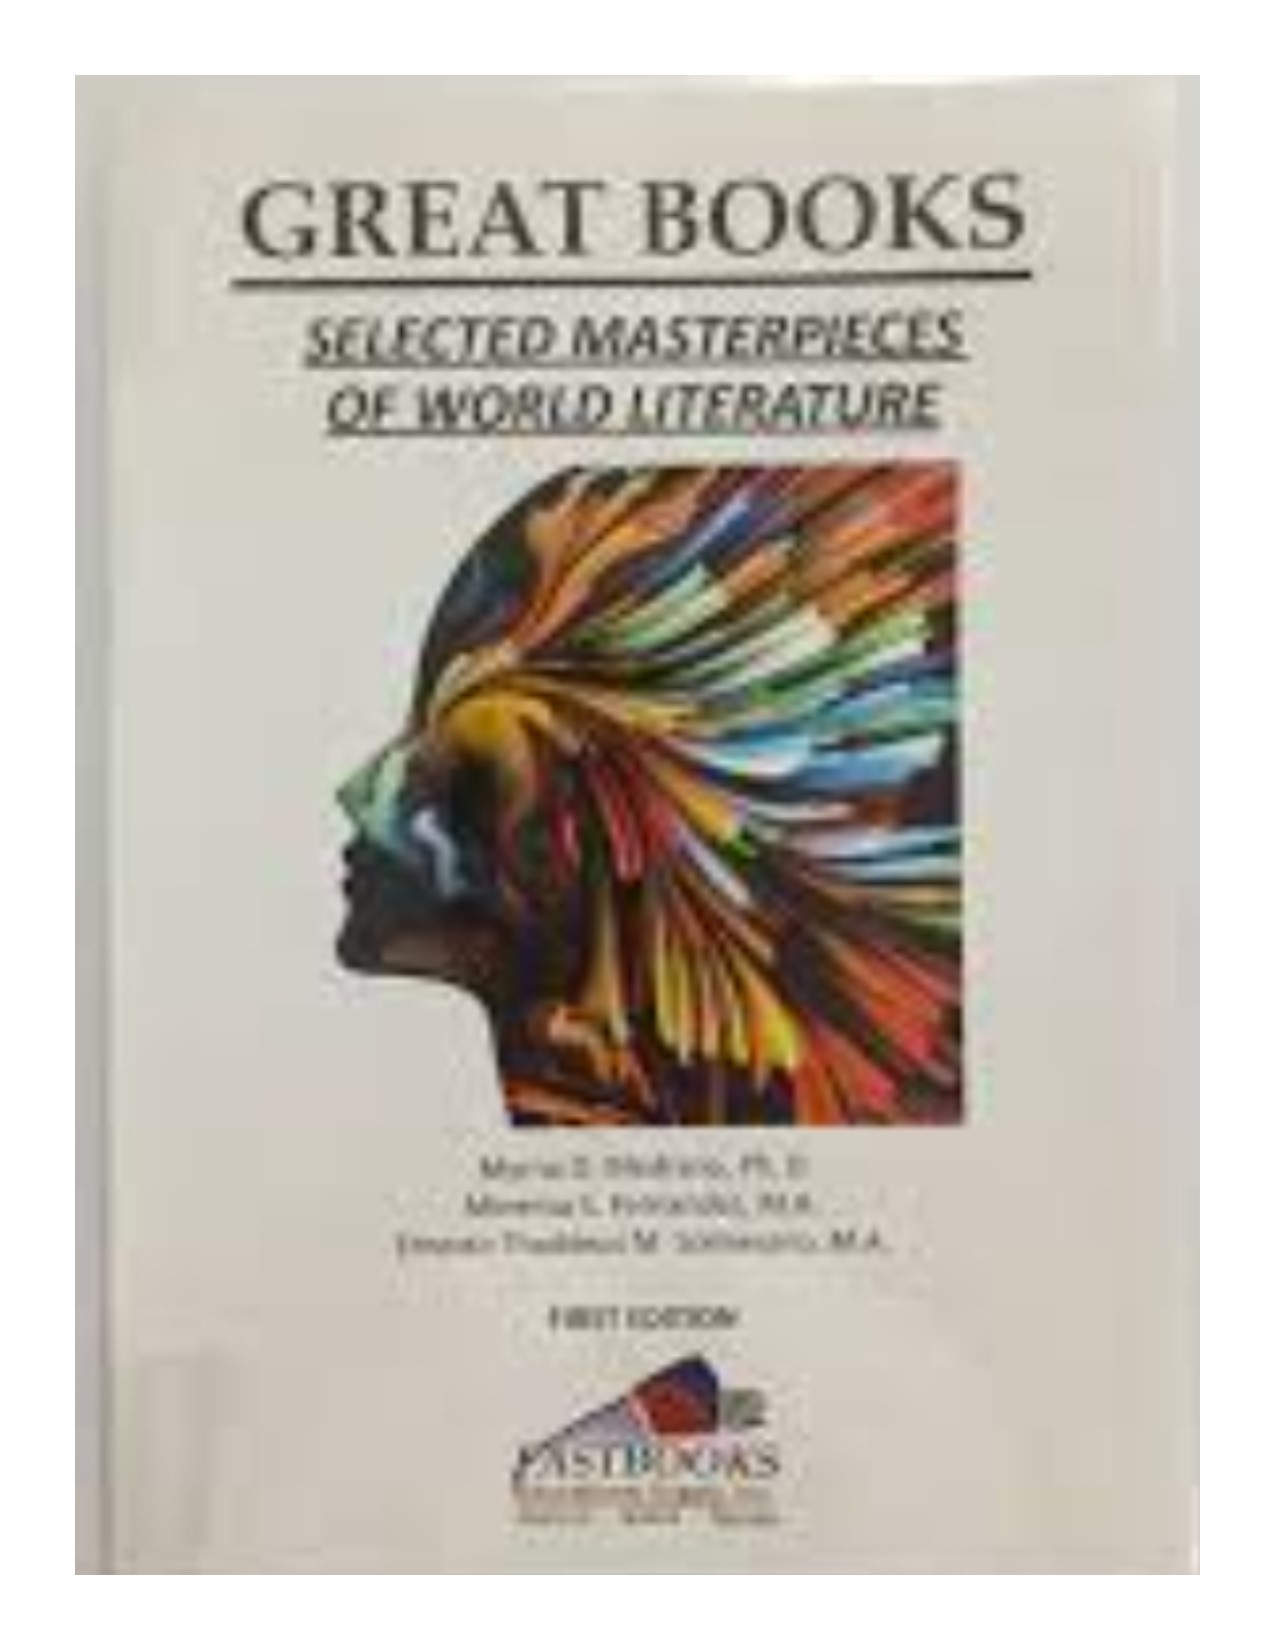 Great books selected masterpieces of world literature